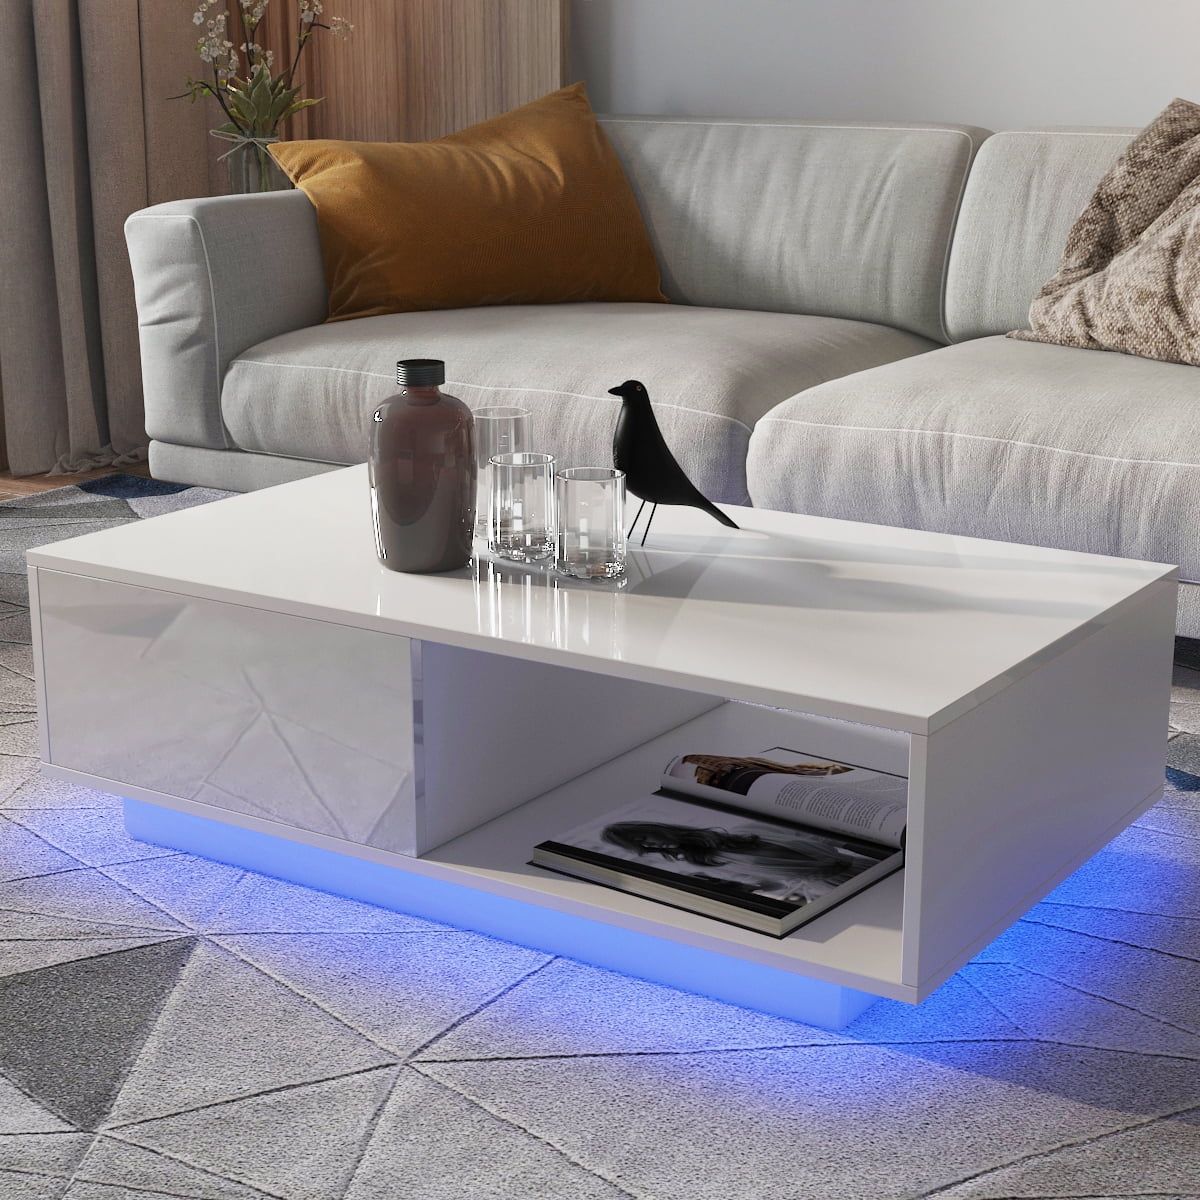 Led Coffee Table With Spacious Lower Shelf & 2 Drawers, Modern Sofa Intended For Rectangular Led Coffee Tables (View 14 of 15)